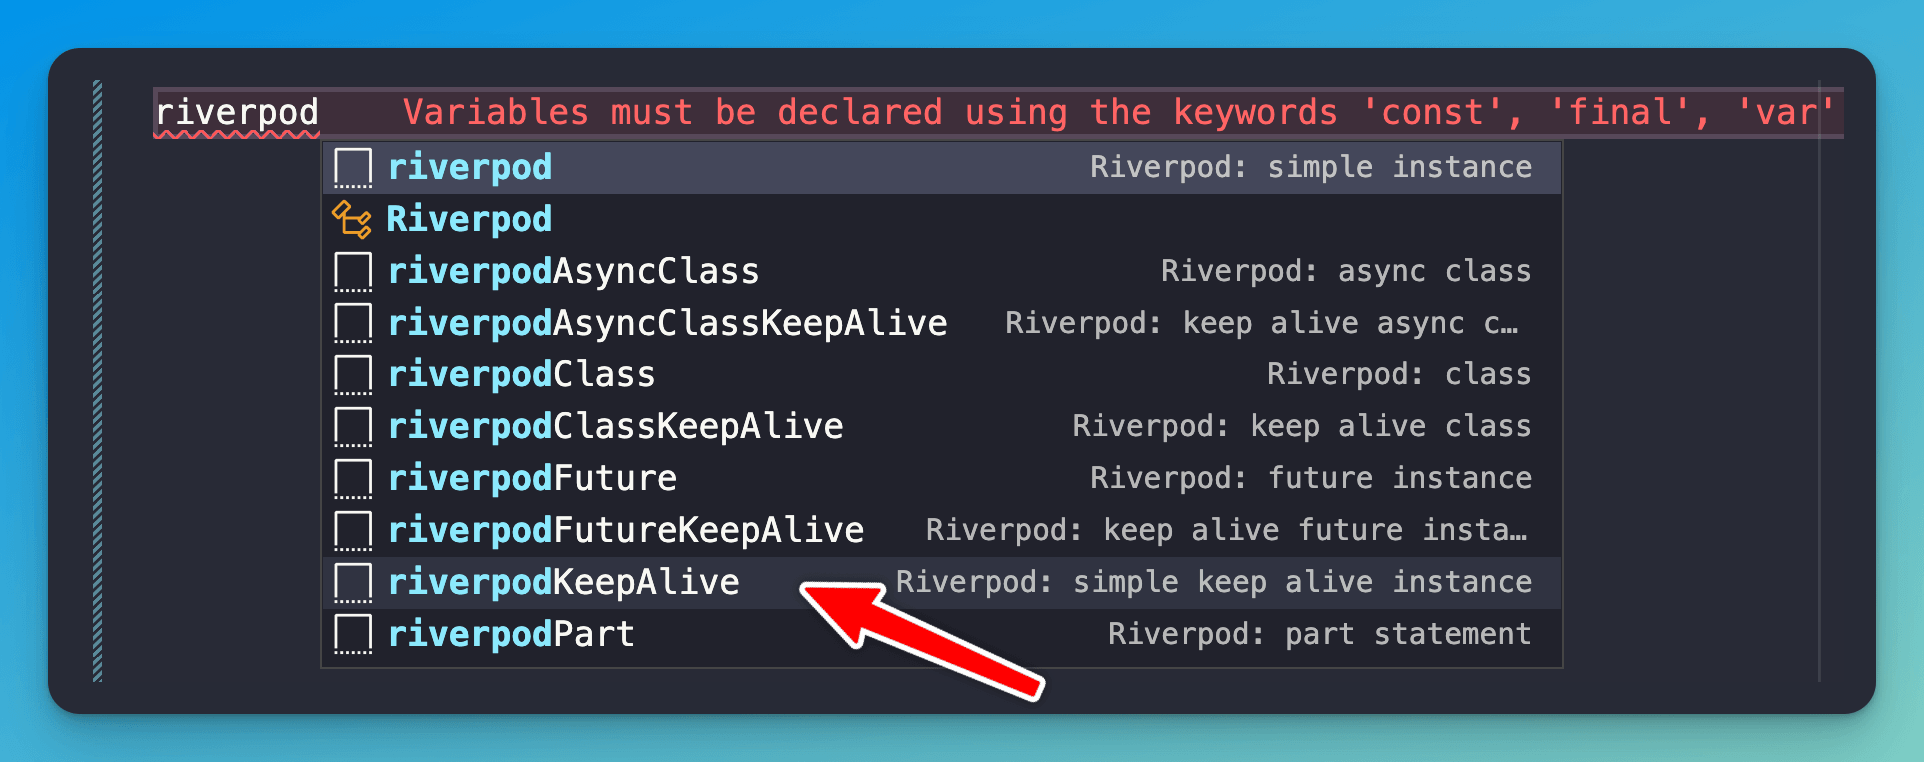 riverpod-snippet-keepalive.png